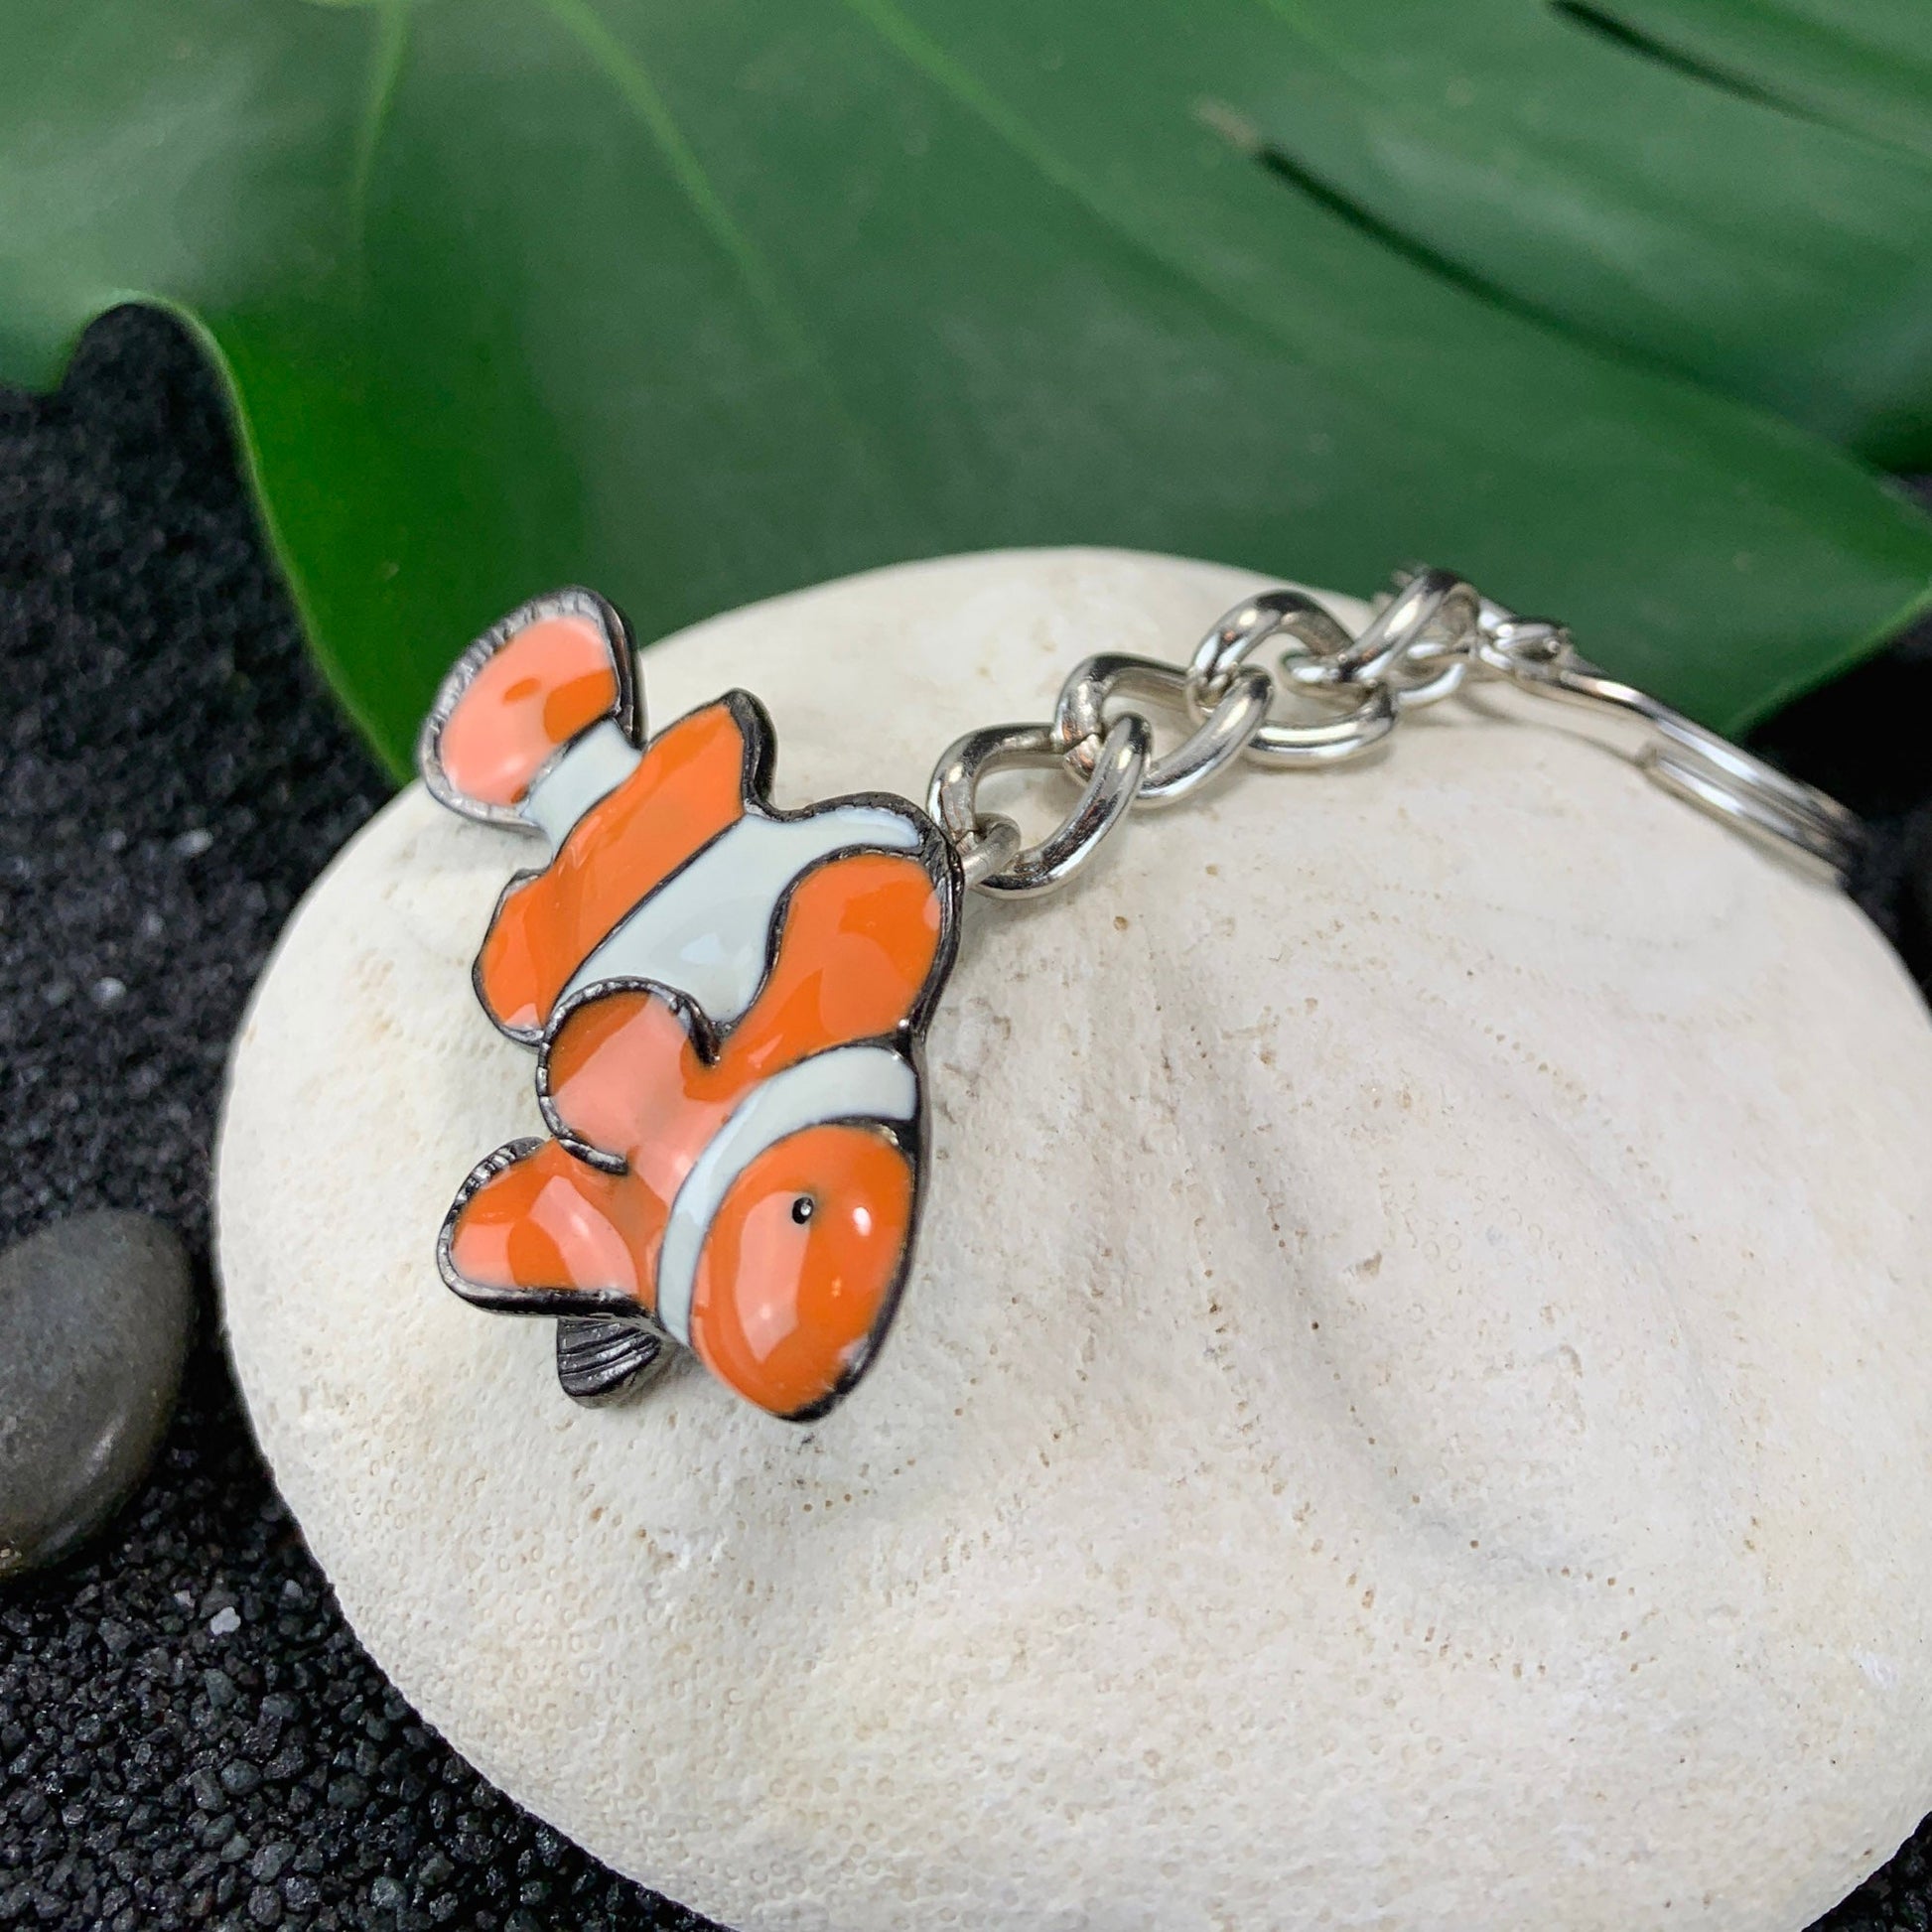 Clown Fish Keychain for Women and Teens-Key Chain Gift for Women, Clown Fish Key Ring, Clown Fish Charm, Gifts for Ocean Lovers, Pewter Keychains - The Tool Store